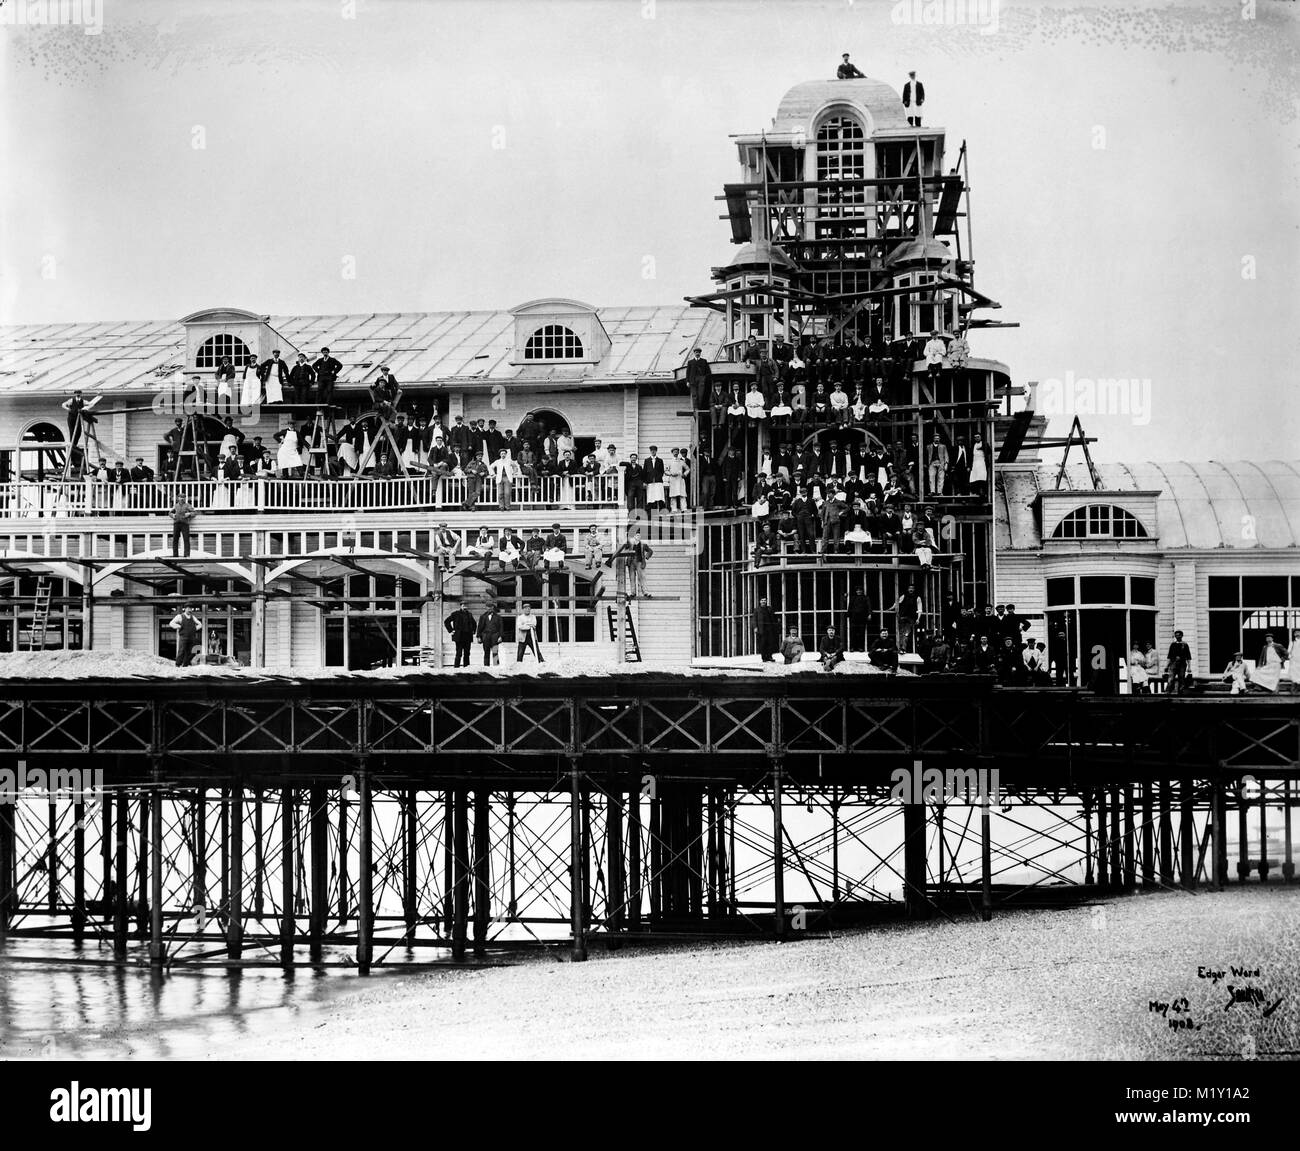 AJAXNETPHOTO. MAY 4TH, 1908. SOUTHSEA, ENGLAND. - PIER BUILDERS - THE PIER UNDER CONSTRUCTION. 154 MEN AND ONE DOG FEATURE IN THIS OUTSTANDING GROUP PHOTOGRAPH TAKEN FROM THE ORIGINAL GLASS PLATE MEASURING 14.75 X 12 INCHES. PHOTO:EDGAR WARD/AJAX VINTAGE PICTURE LIBRARY. REF:D00781B Stock Photo